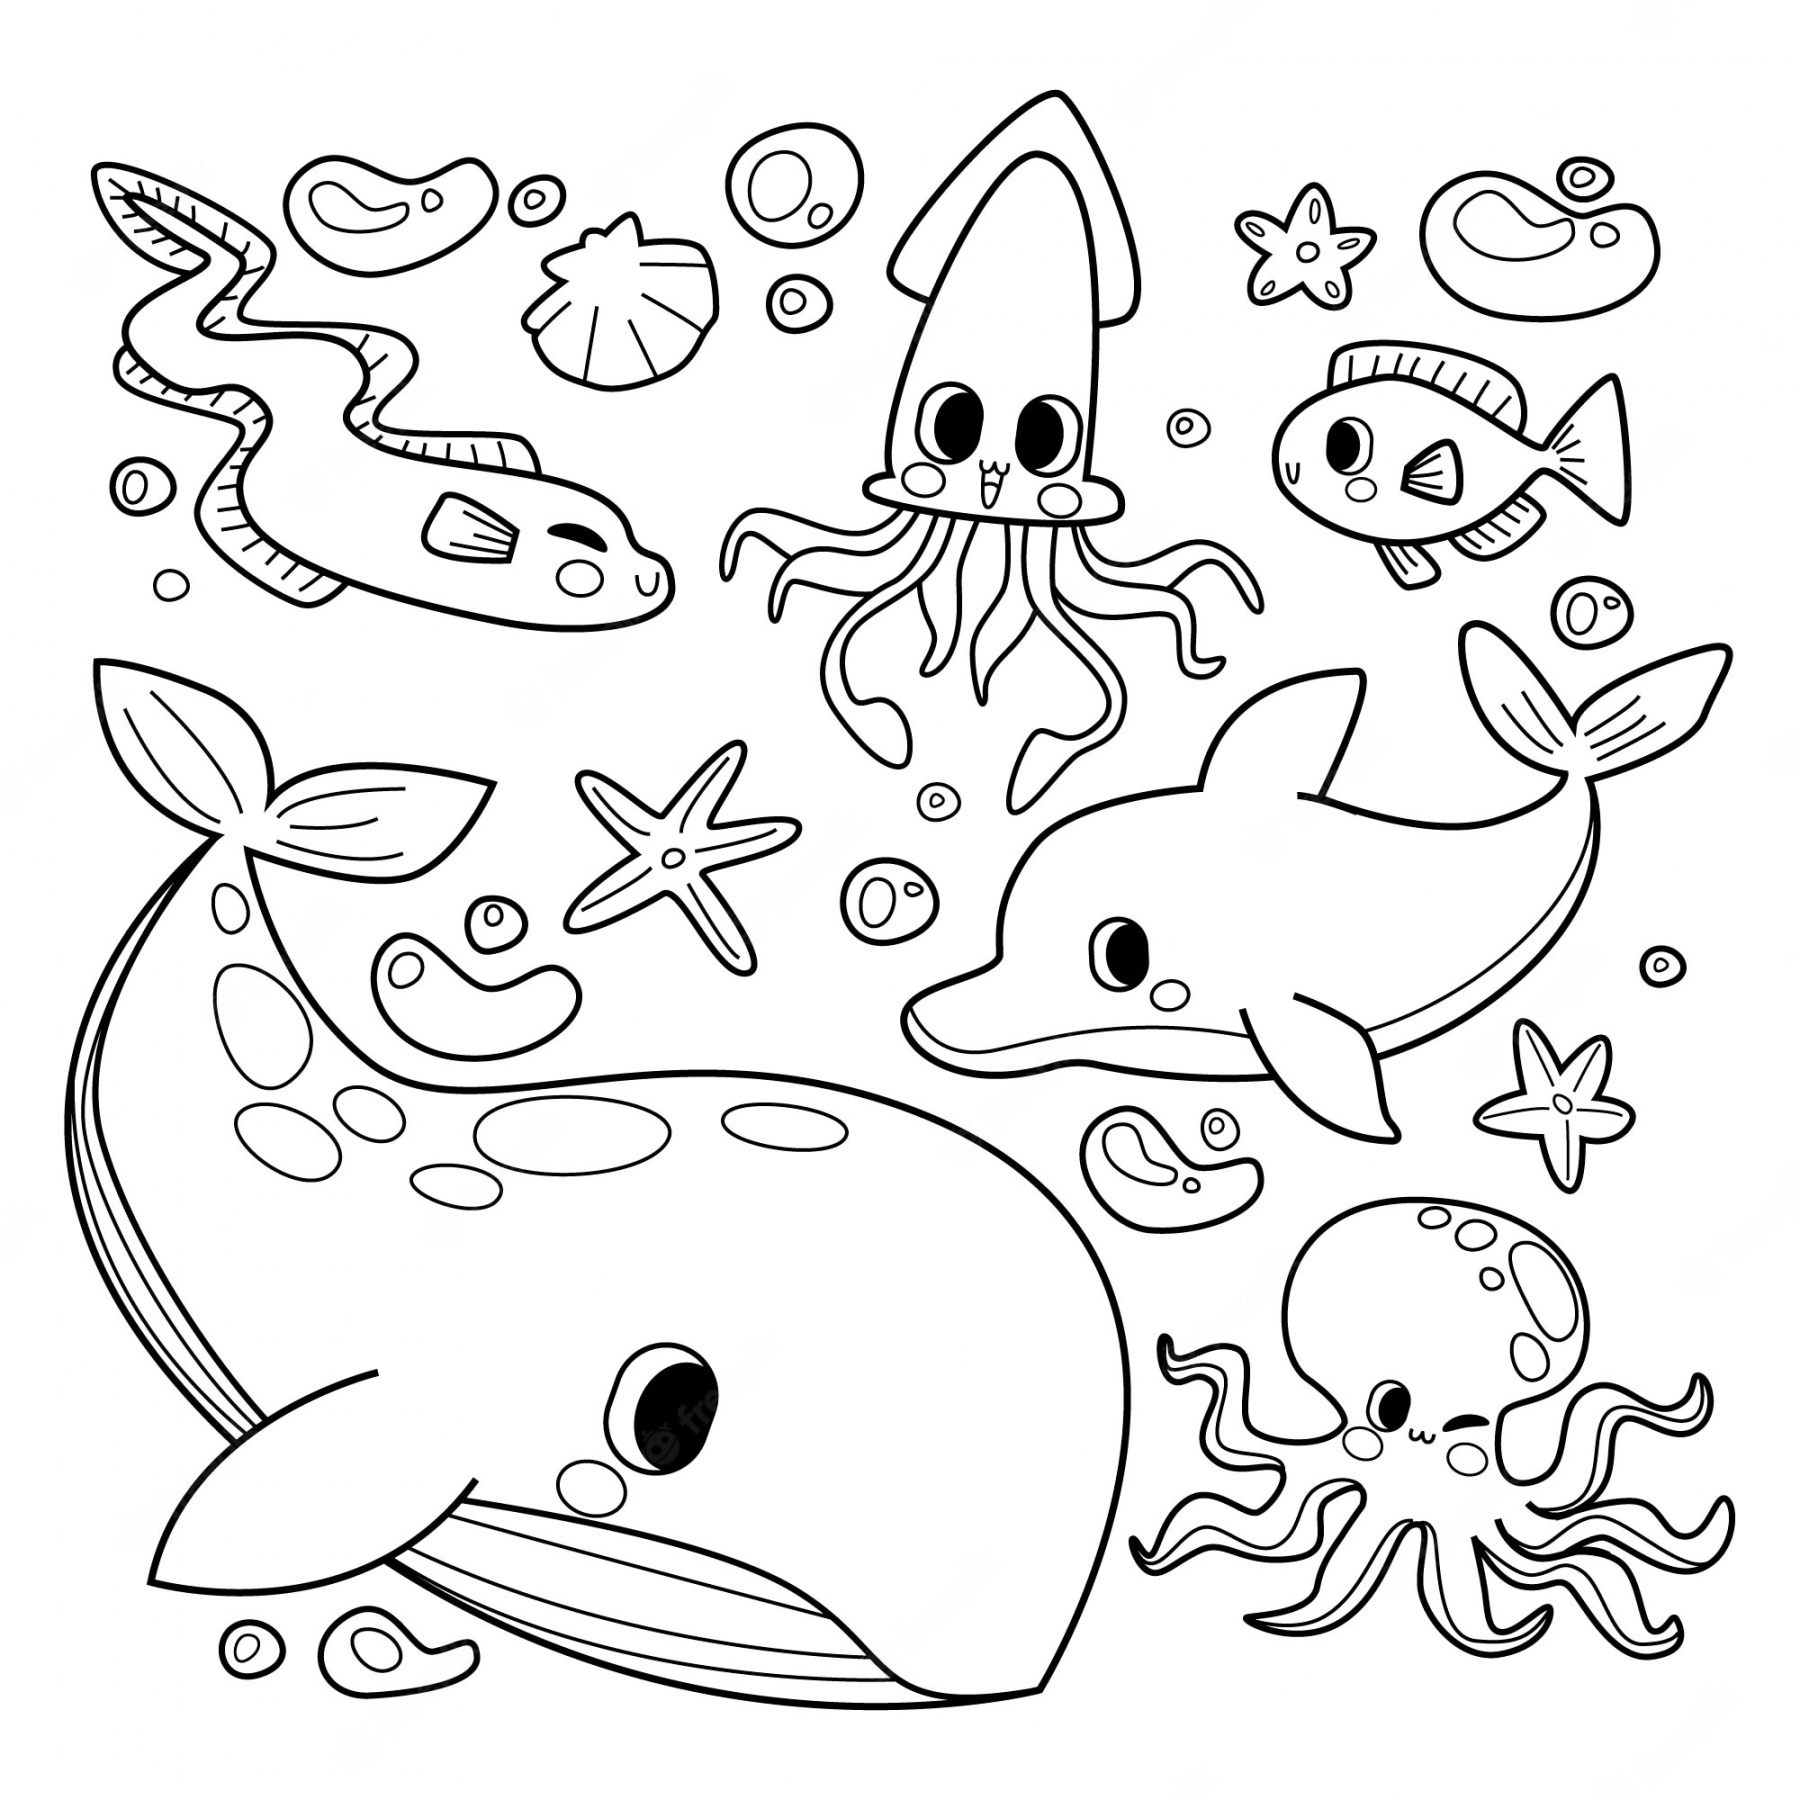 Free Printable Coloring Pages - Printable - Coloring Pages Images - Free Download on Freepik